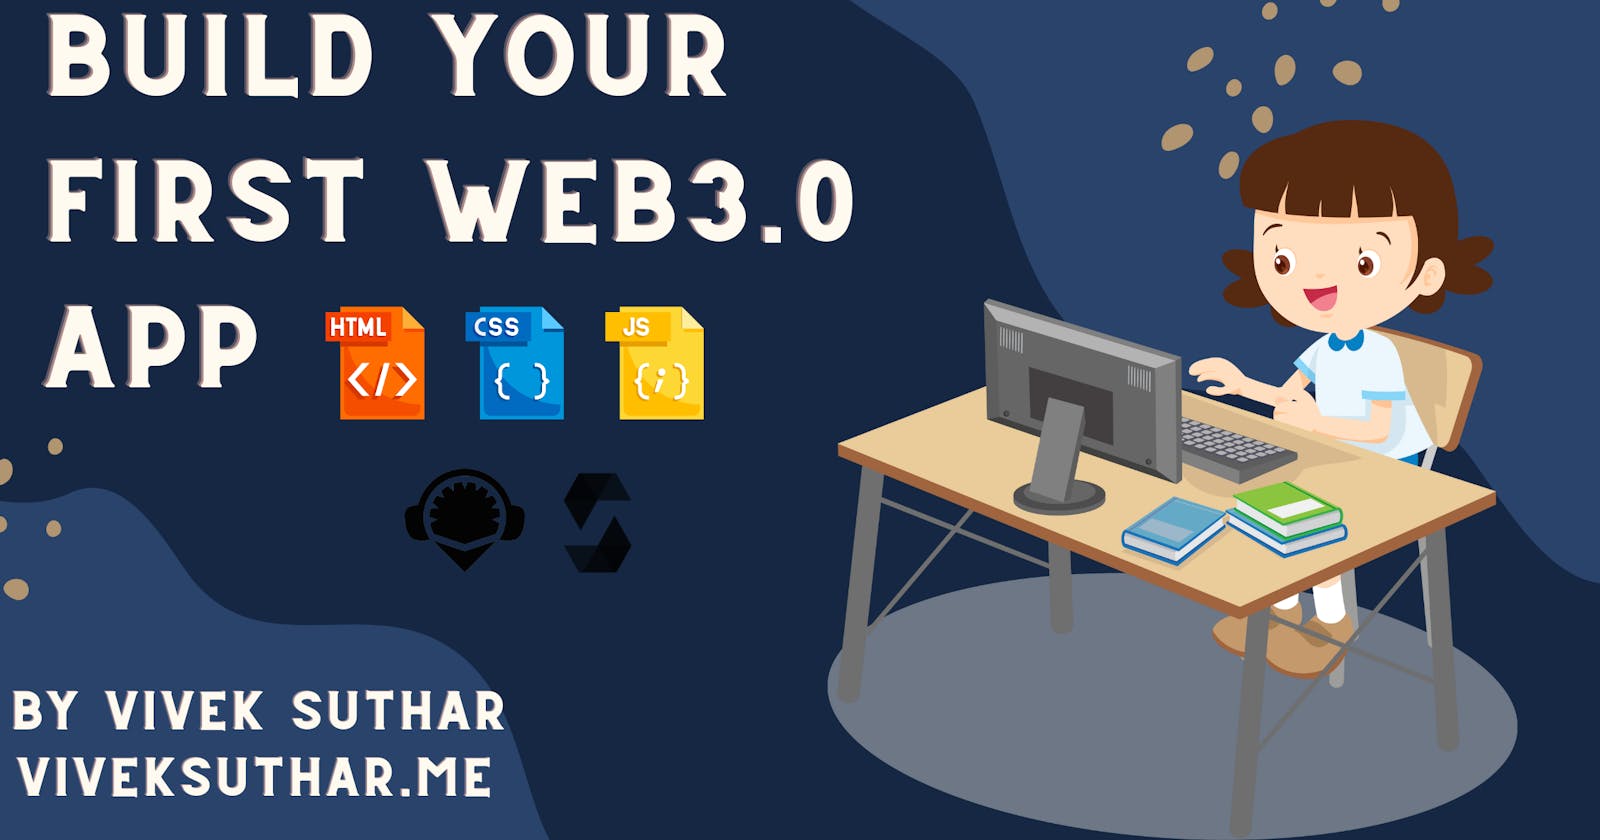 Build your first Web 3.0 Application with HTML, CSS, JavaScript, and Remix-IDE.